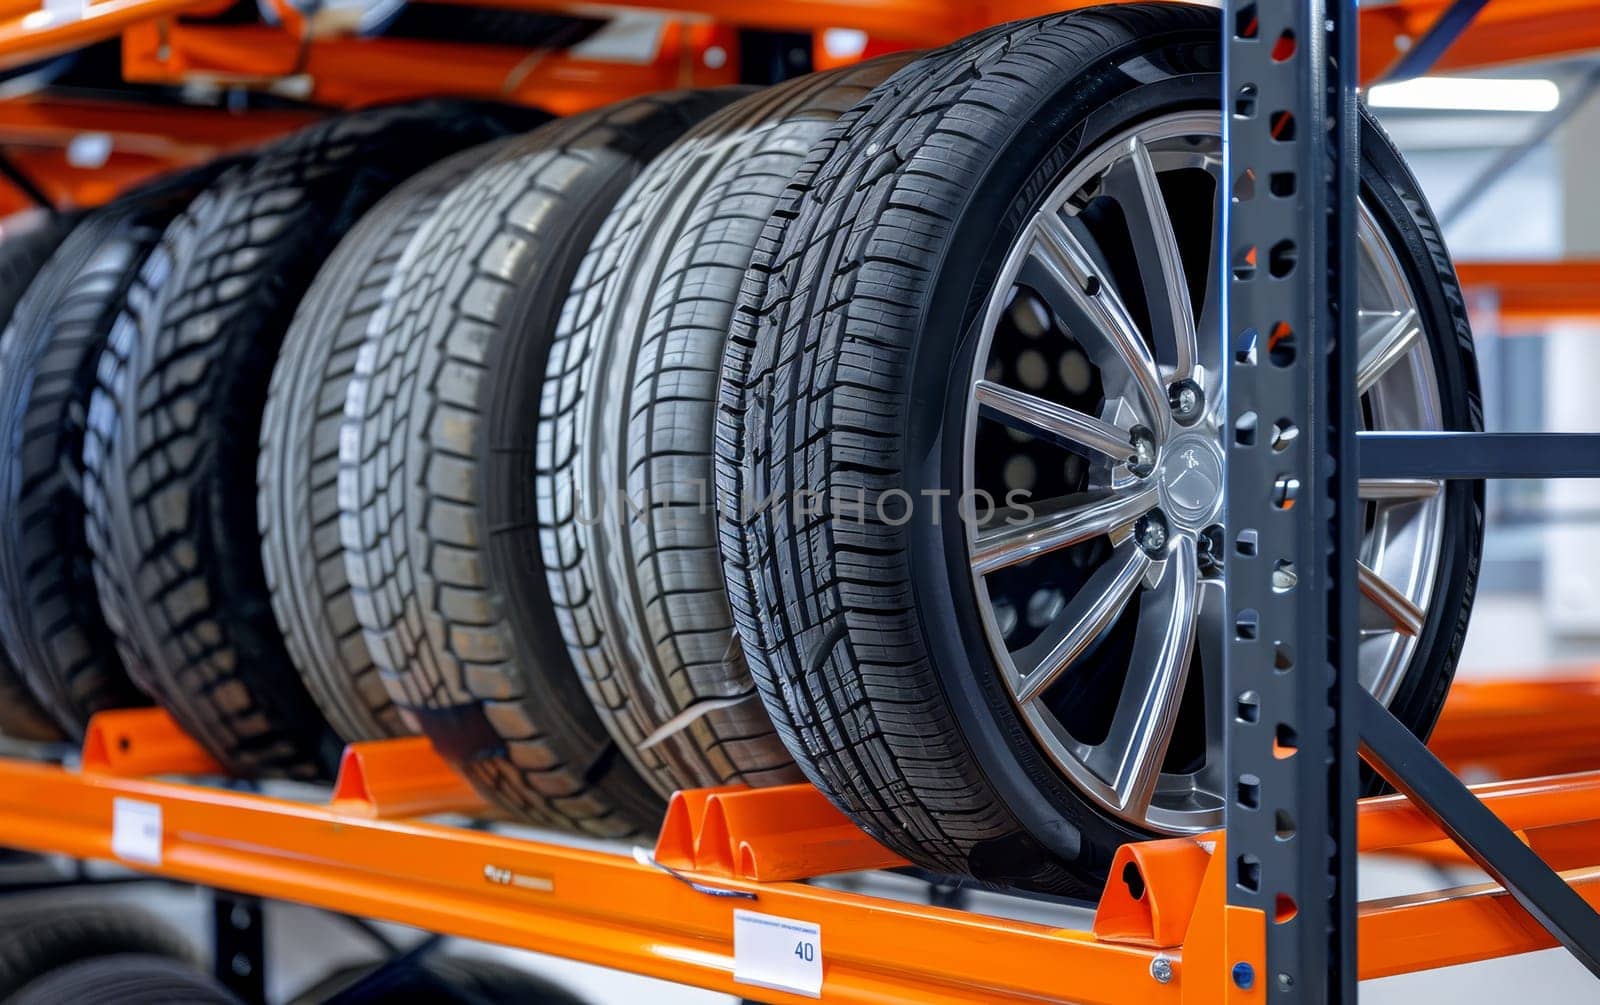 An array of sleek black tires is perfectly arranged on an orange industrial rack, highlighting a clean and modern display in an automotive setting. by sfinks